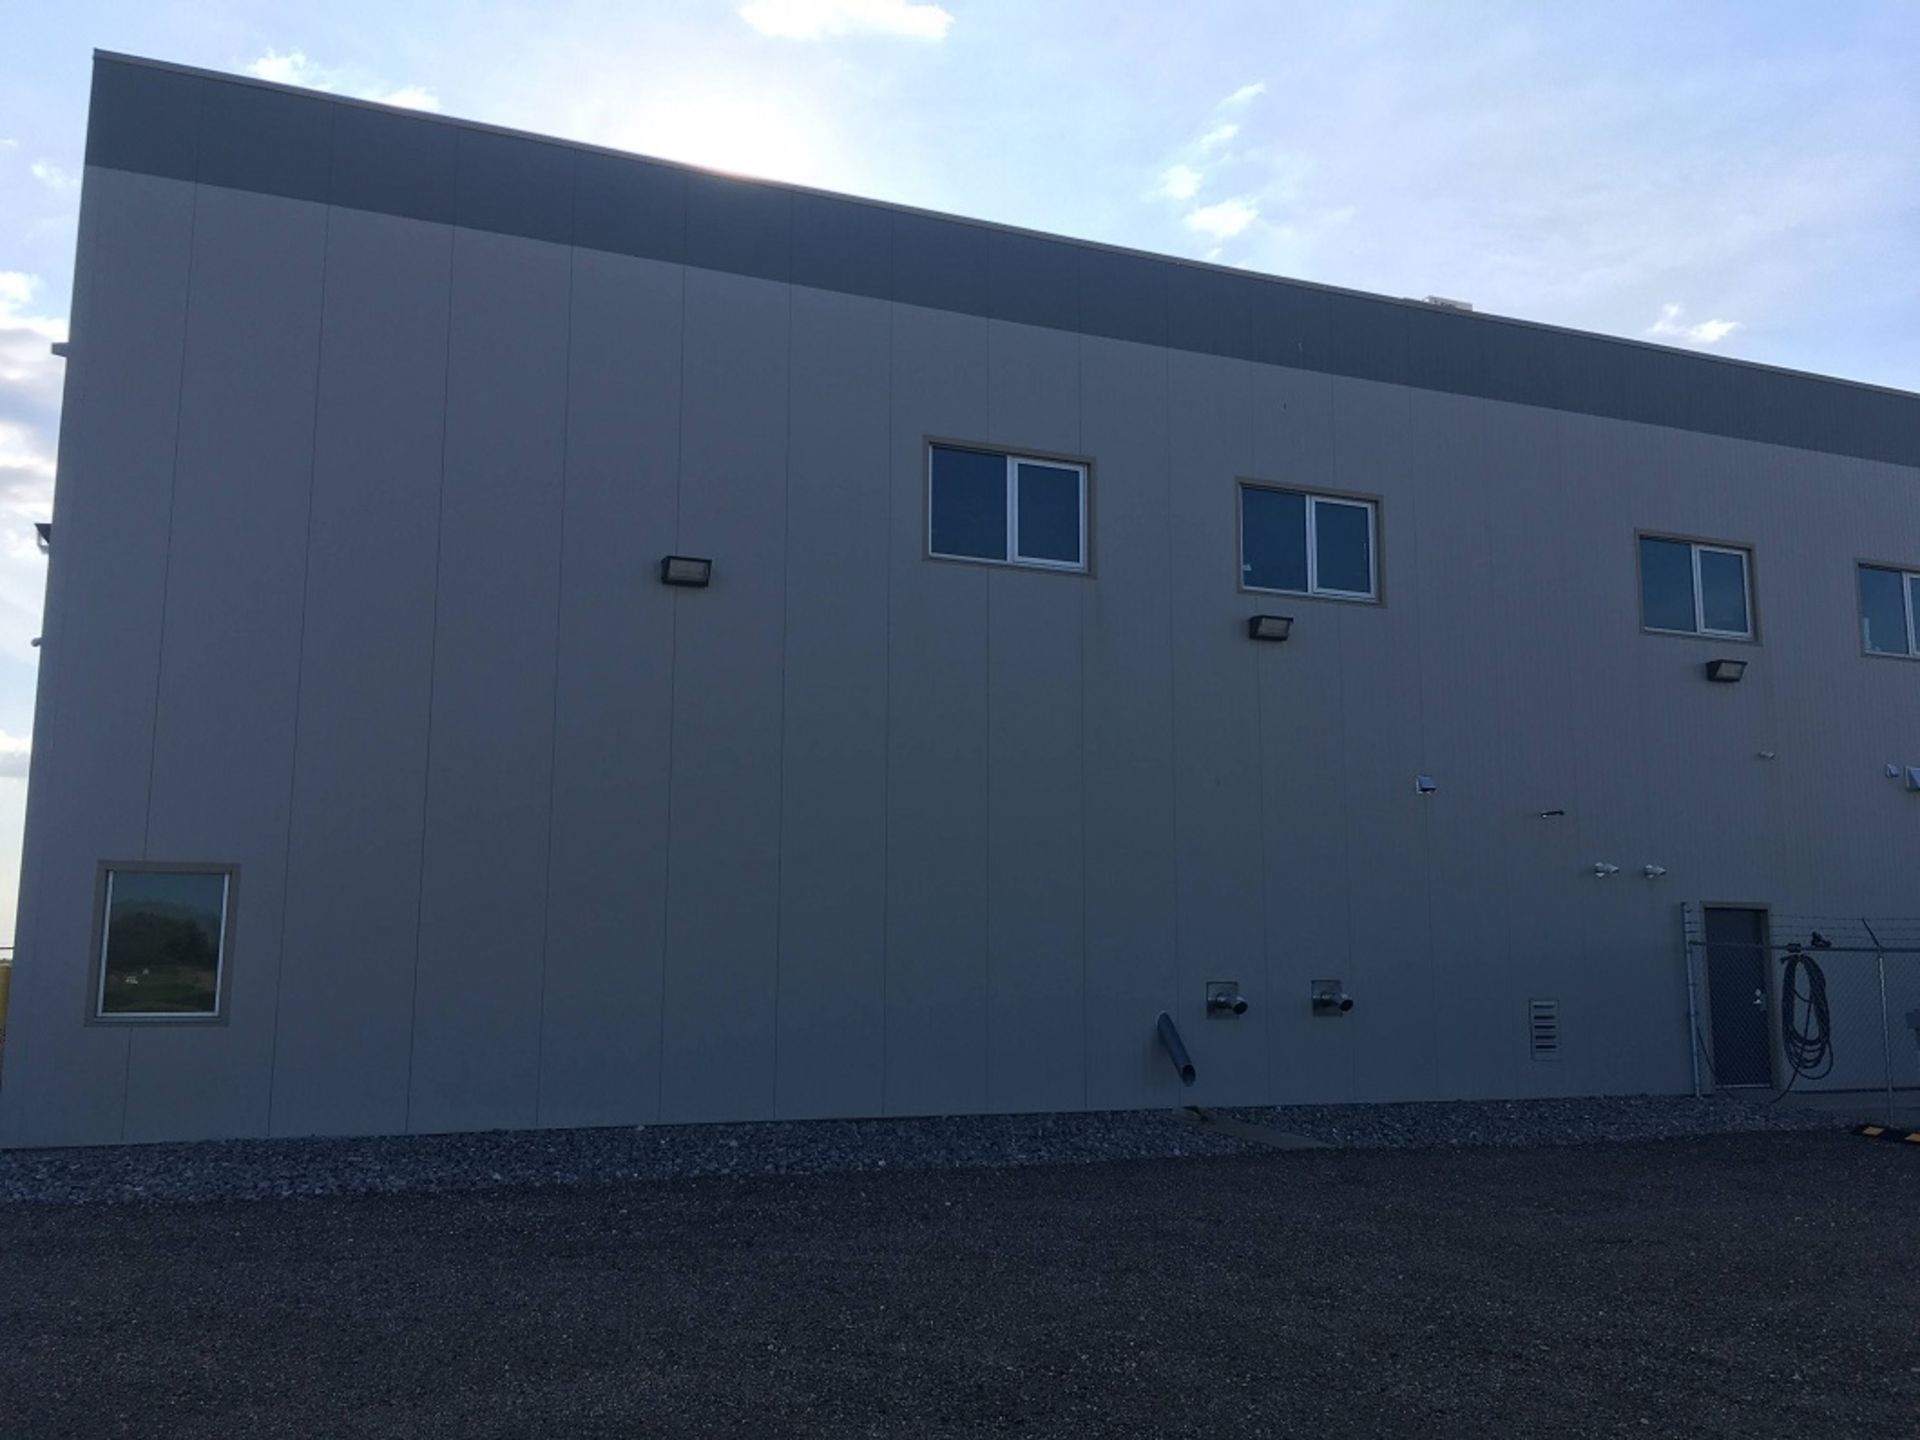 (13) - METL-SPAN 3"THICK X 40" WIDE INSULATED METAL PANELS R20 OFF OF BUILDING, SLIGHT HAIL - Image 10 of 10